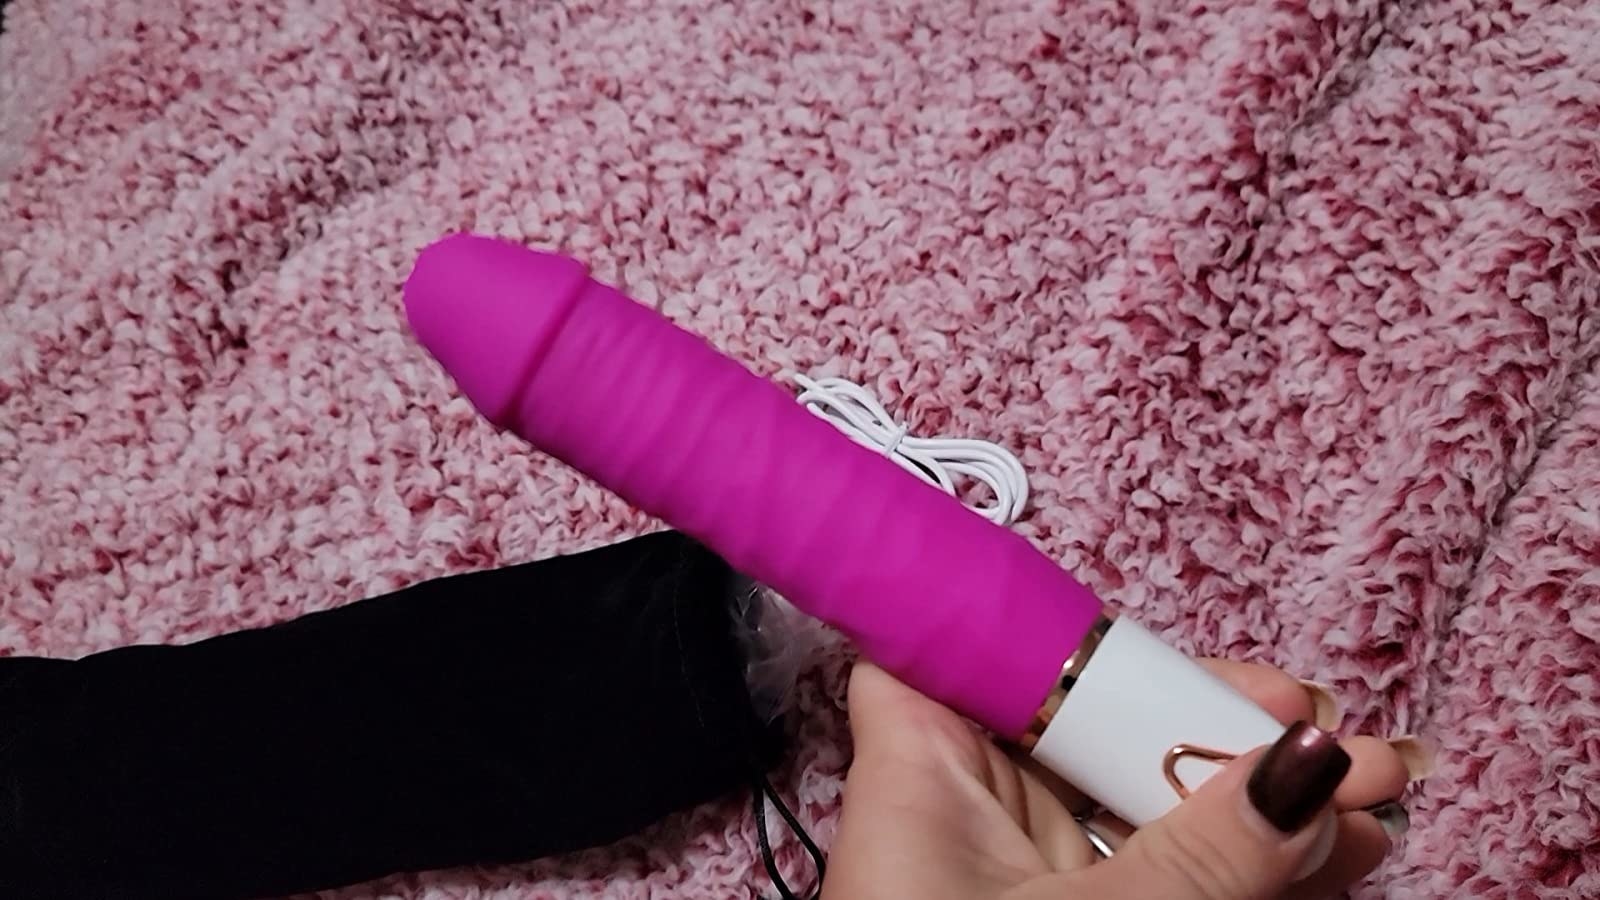 Model holding pink and white realistic vibrator